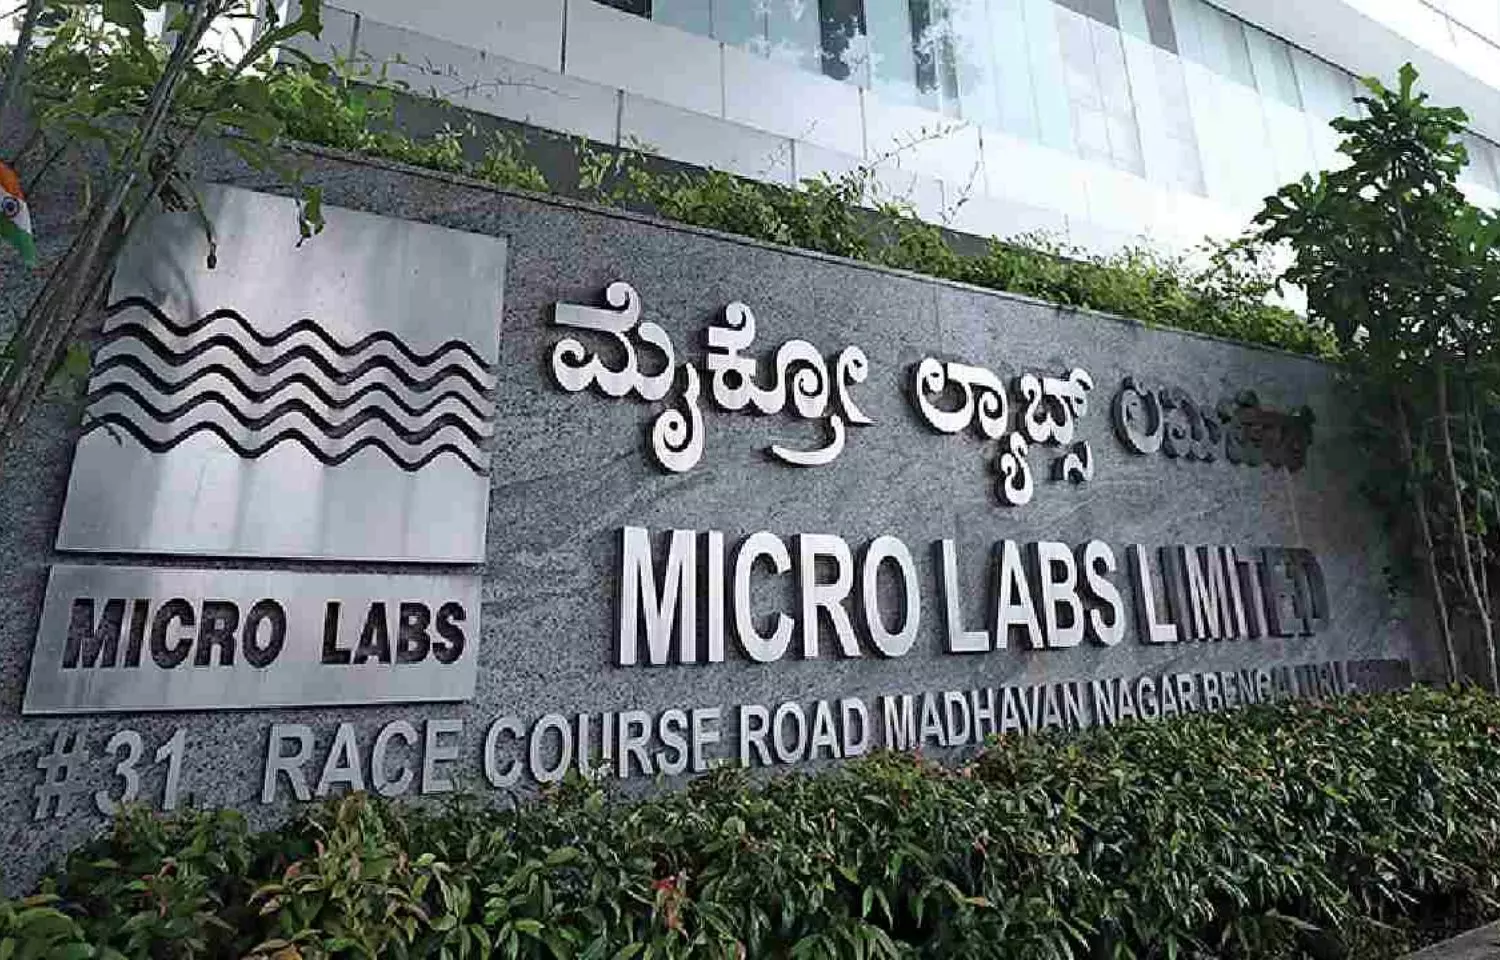 not possible: dolo 650 maker micro labs denies all allegations of rs 1000 crore worth freebies